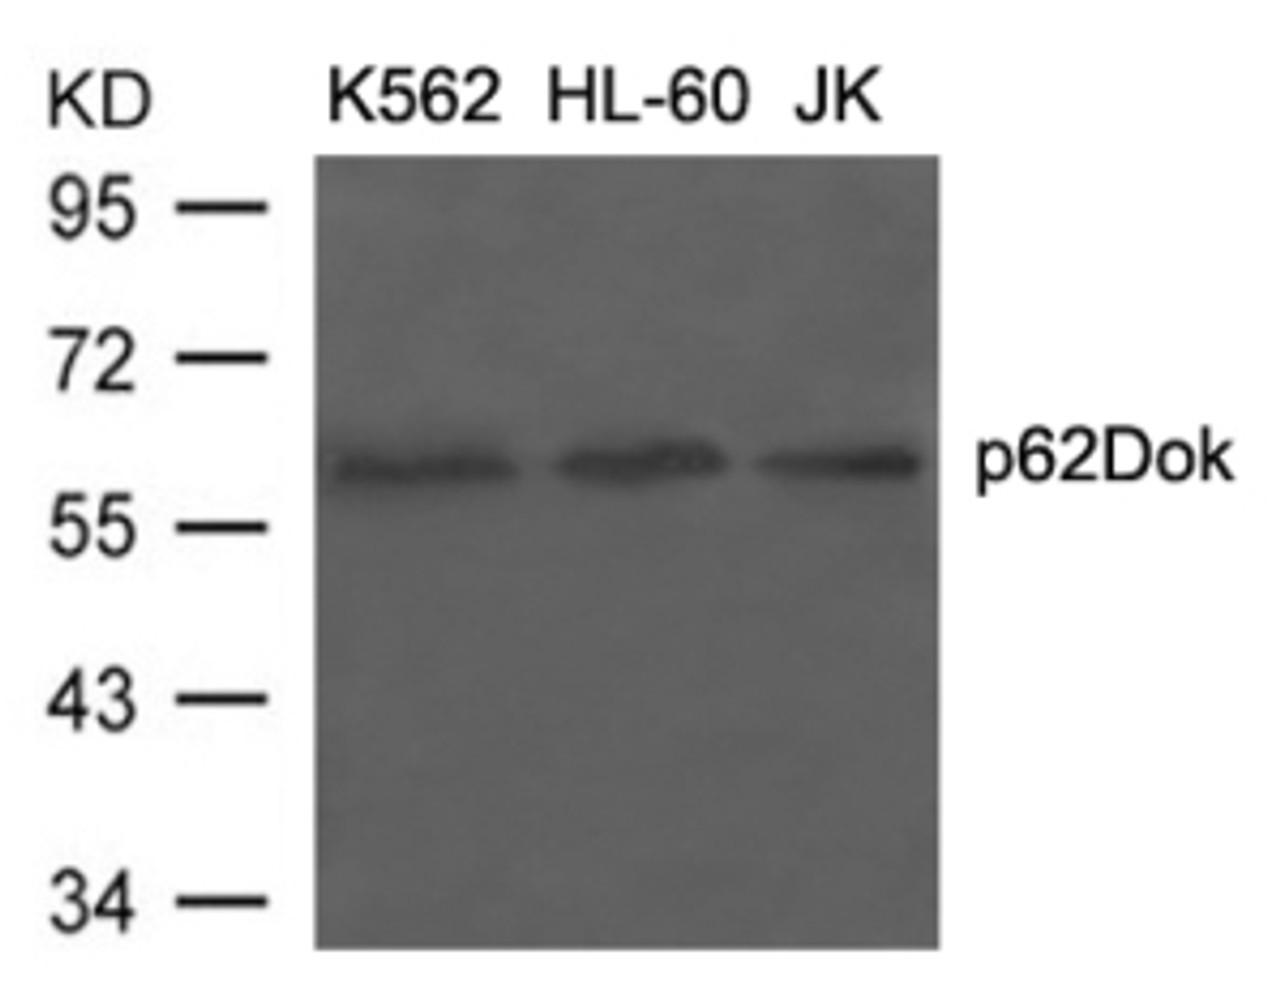 Western blot analysis of lysed extracts from K562, HL-60 and JK cells using p62Dok (Ab-398) .